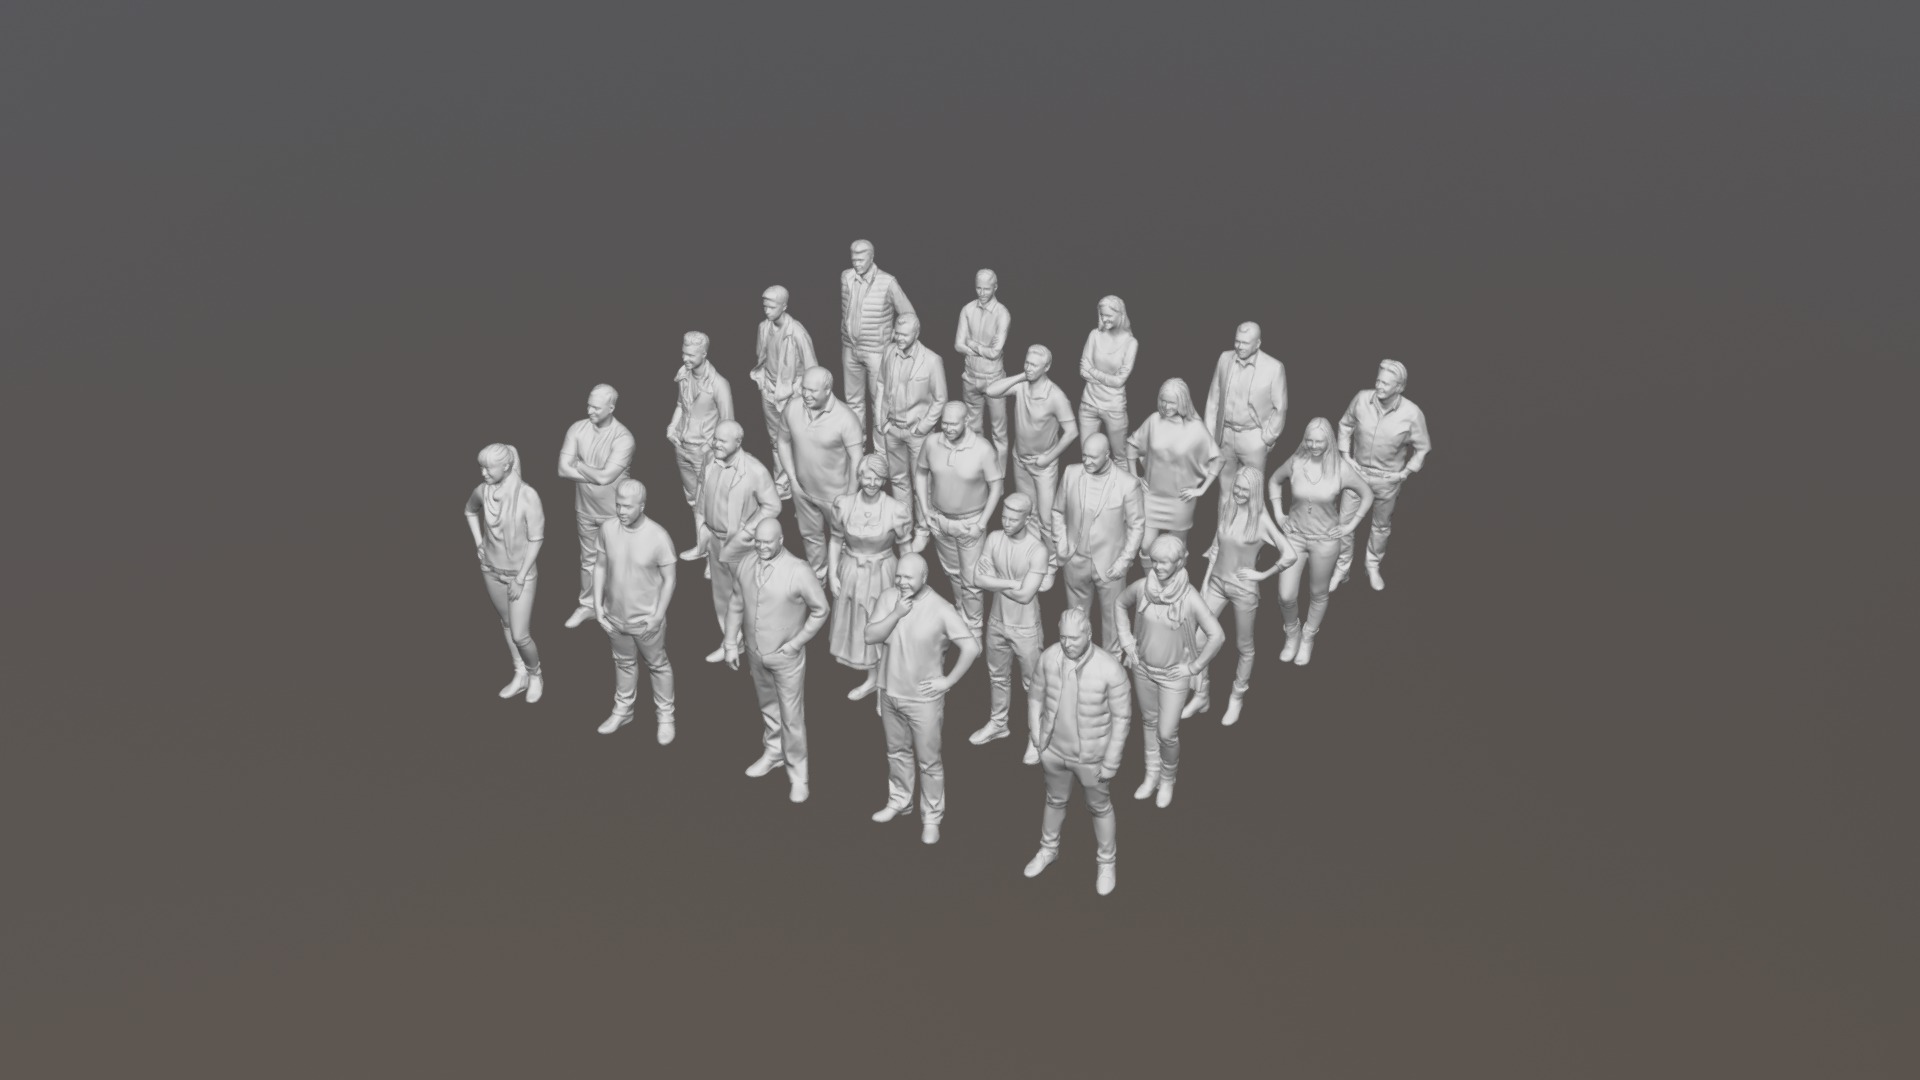 3D model People-Package 4 - This is a 3D model of the People-Package 4. The 3D model is about a group of men in white uniforms.